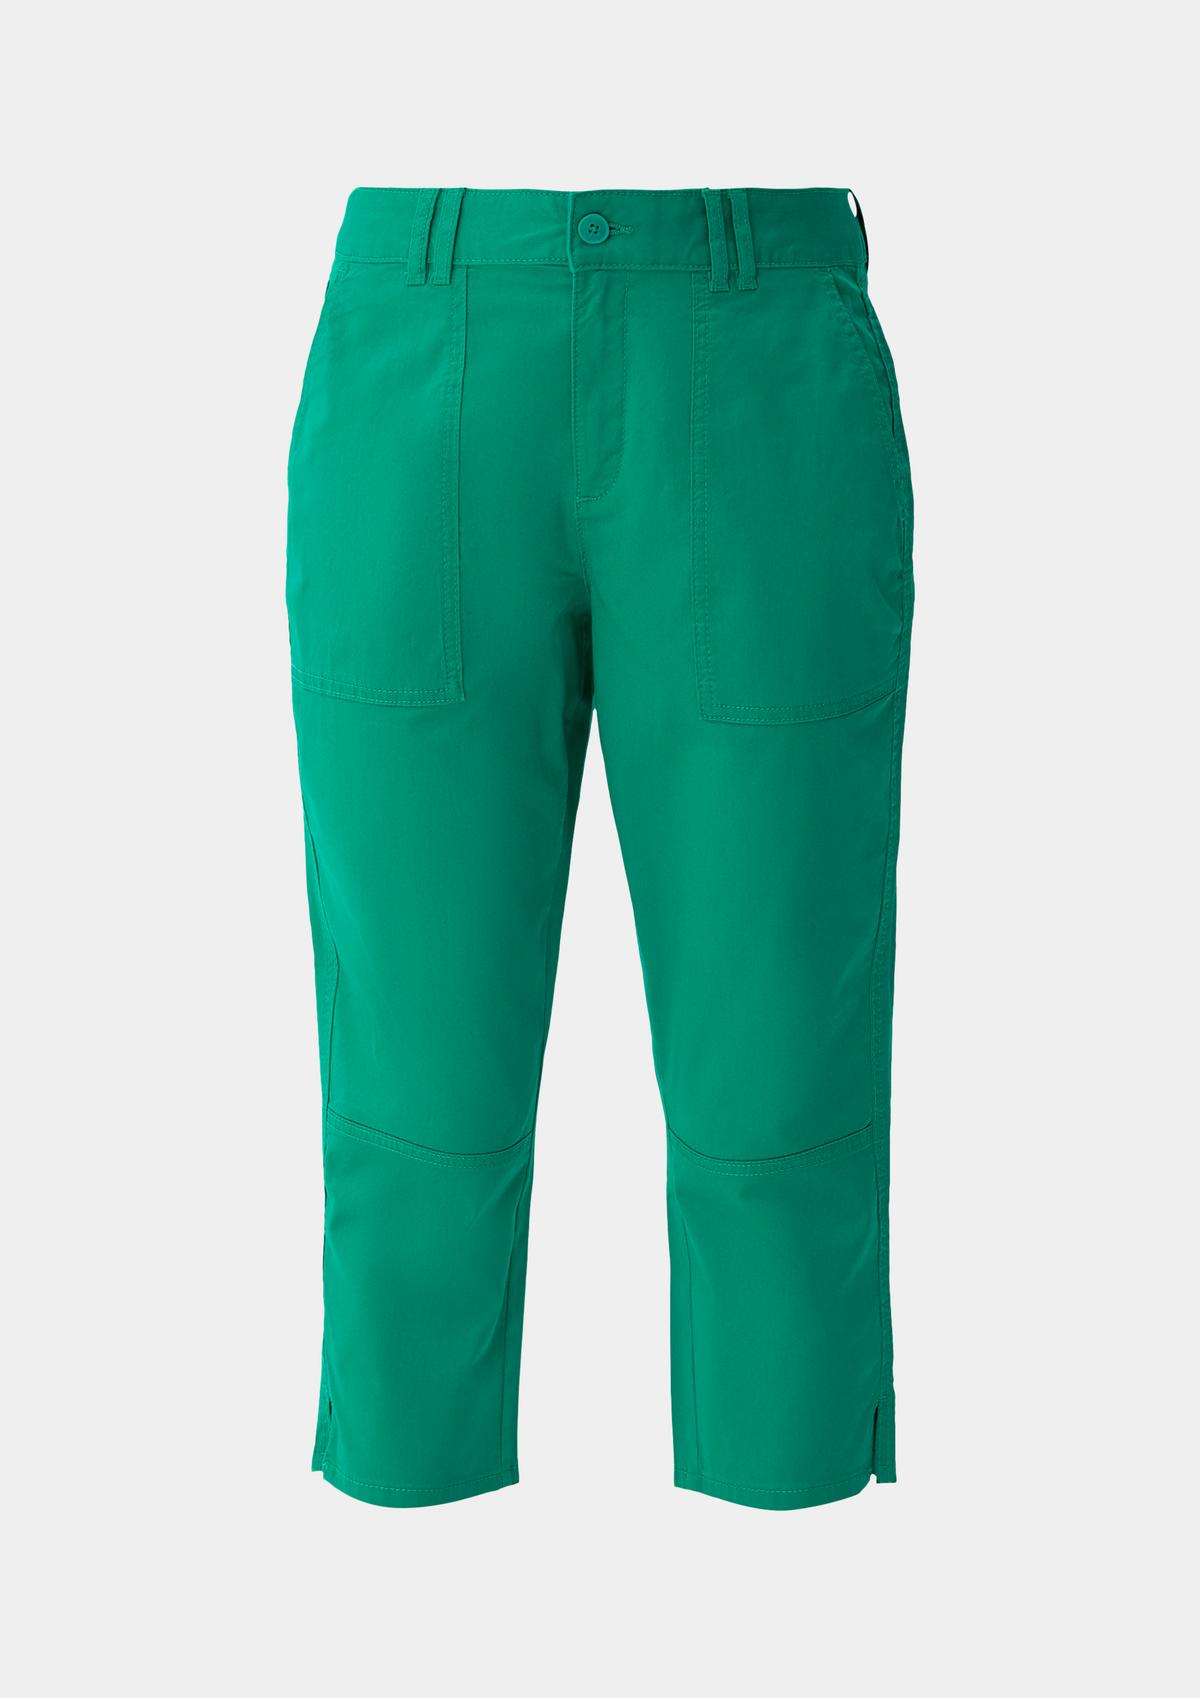 Relaxed fit: capri trousers with double belt loops - royal blue